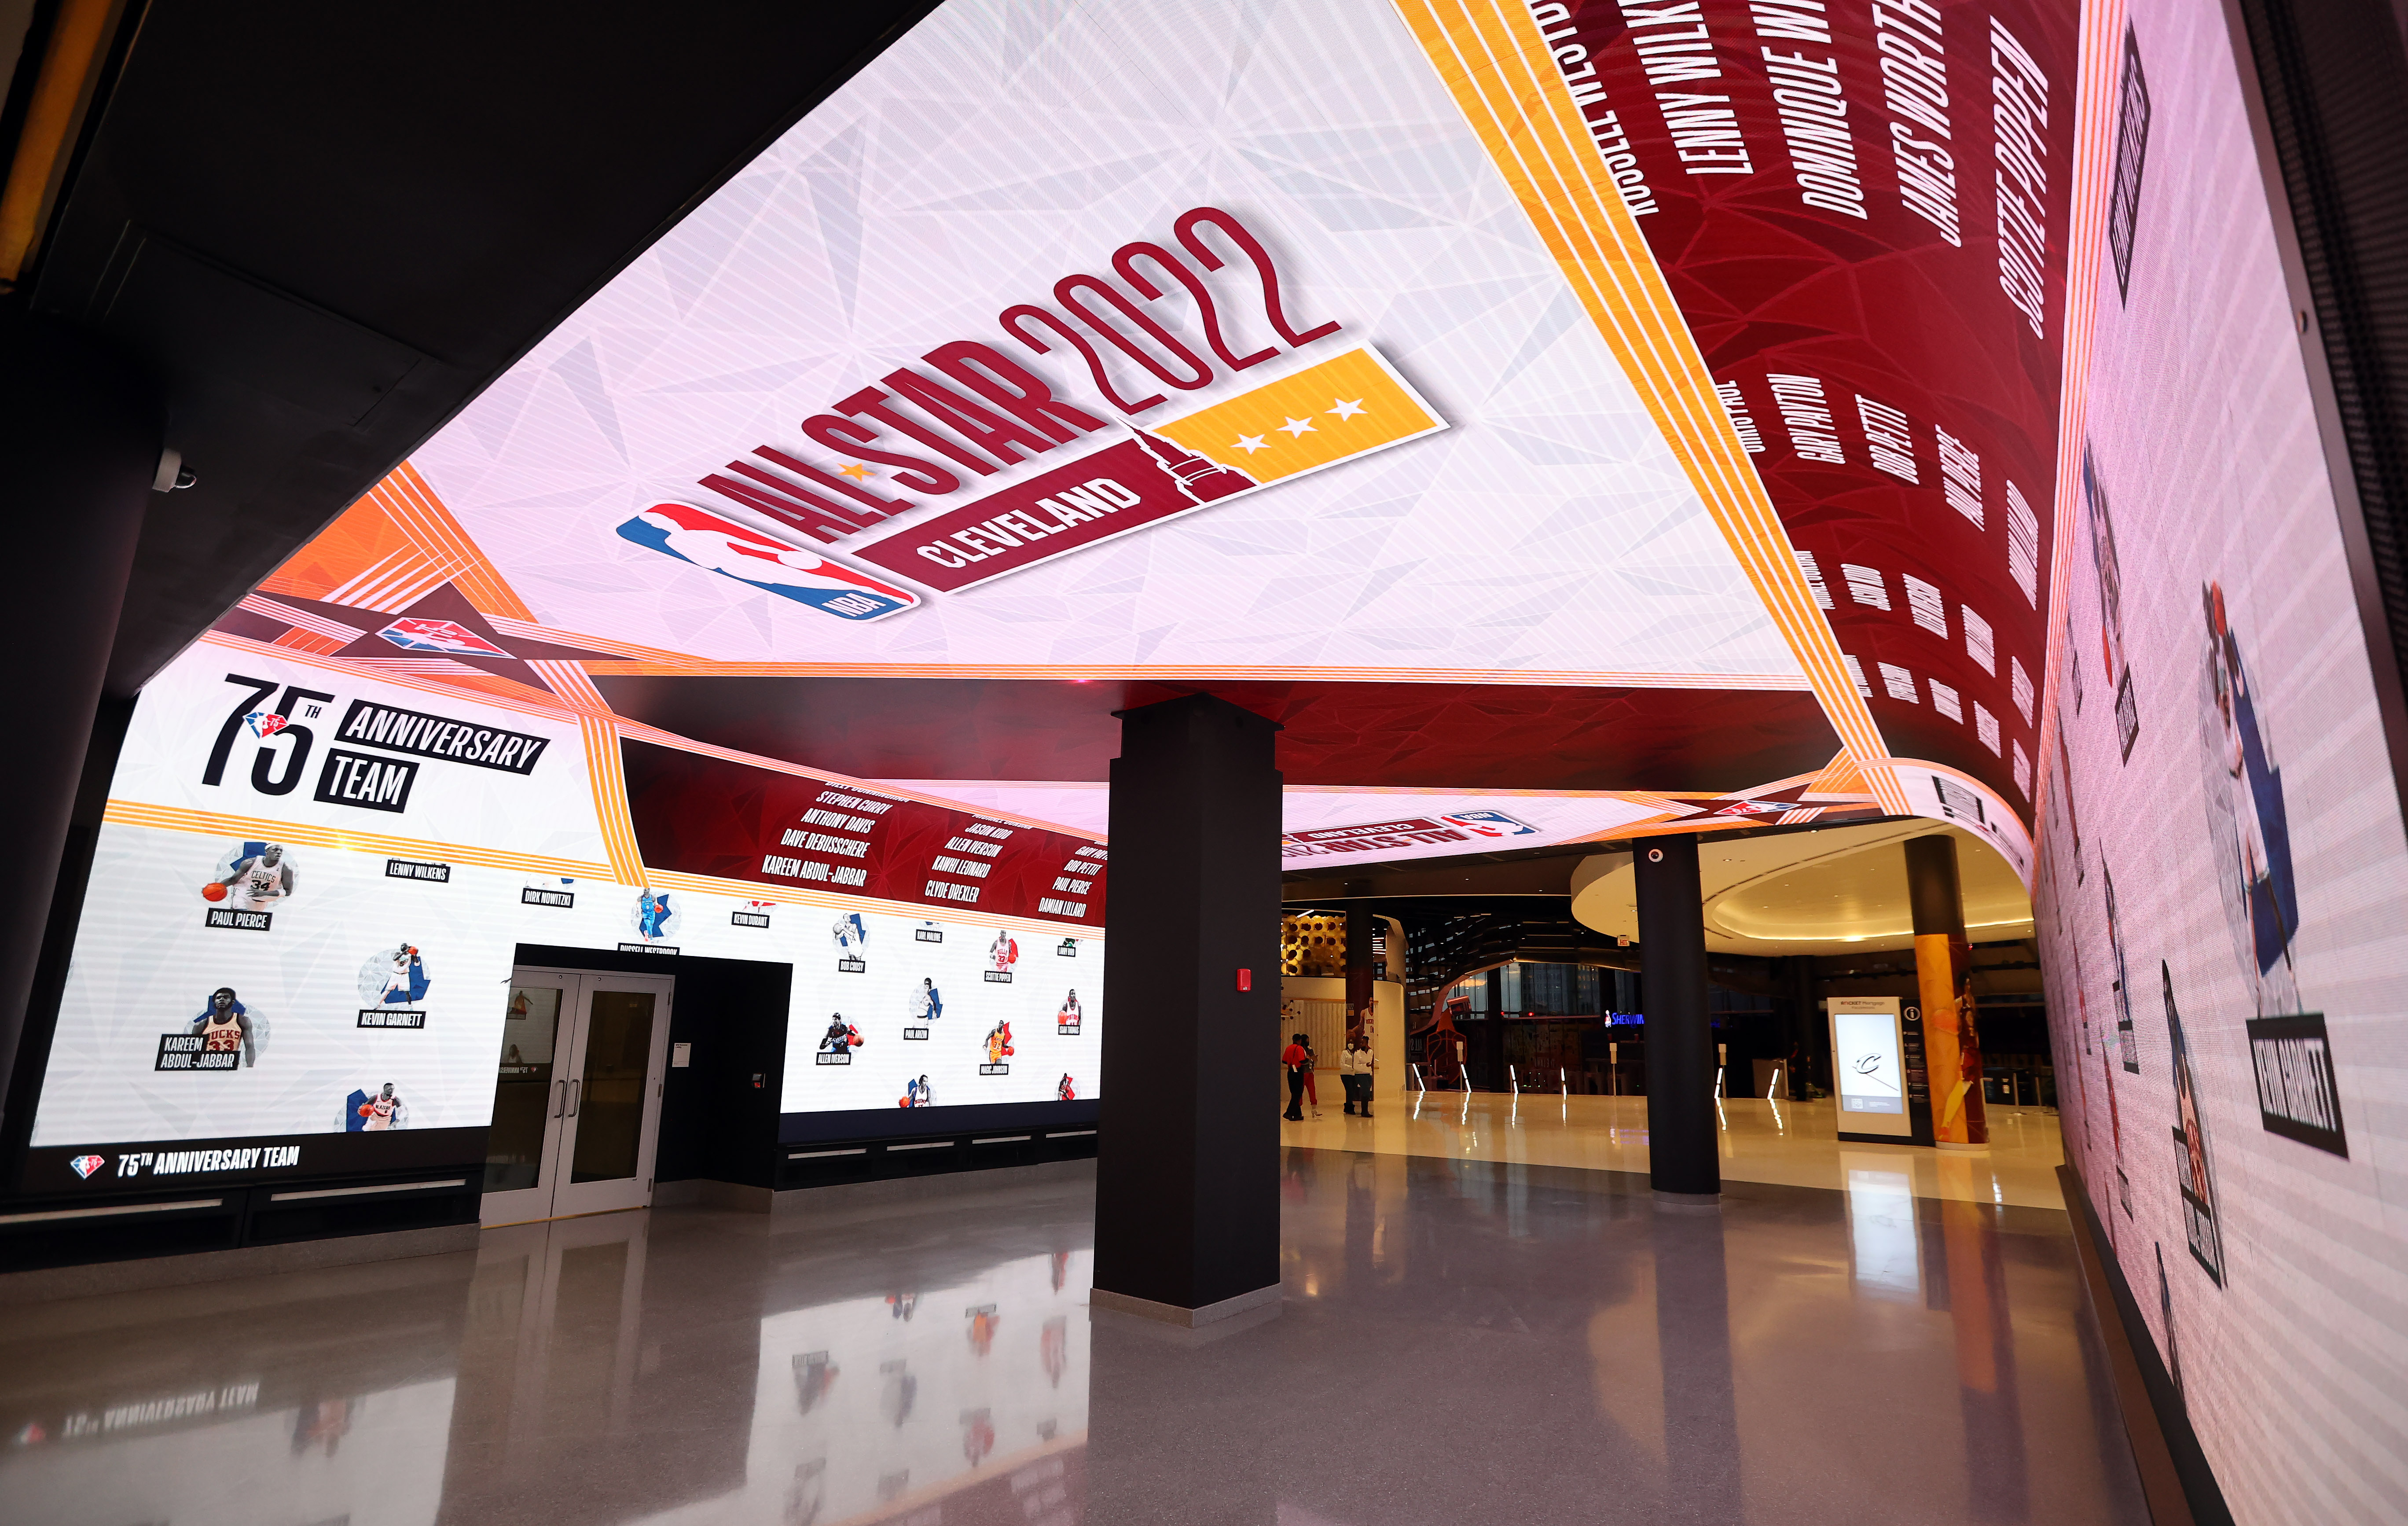 Cleveland Cavaliers debut new team store in Rocket Mortgage FieldHouse